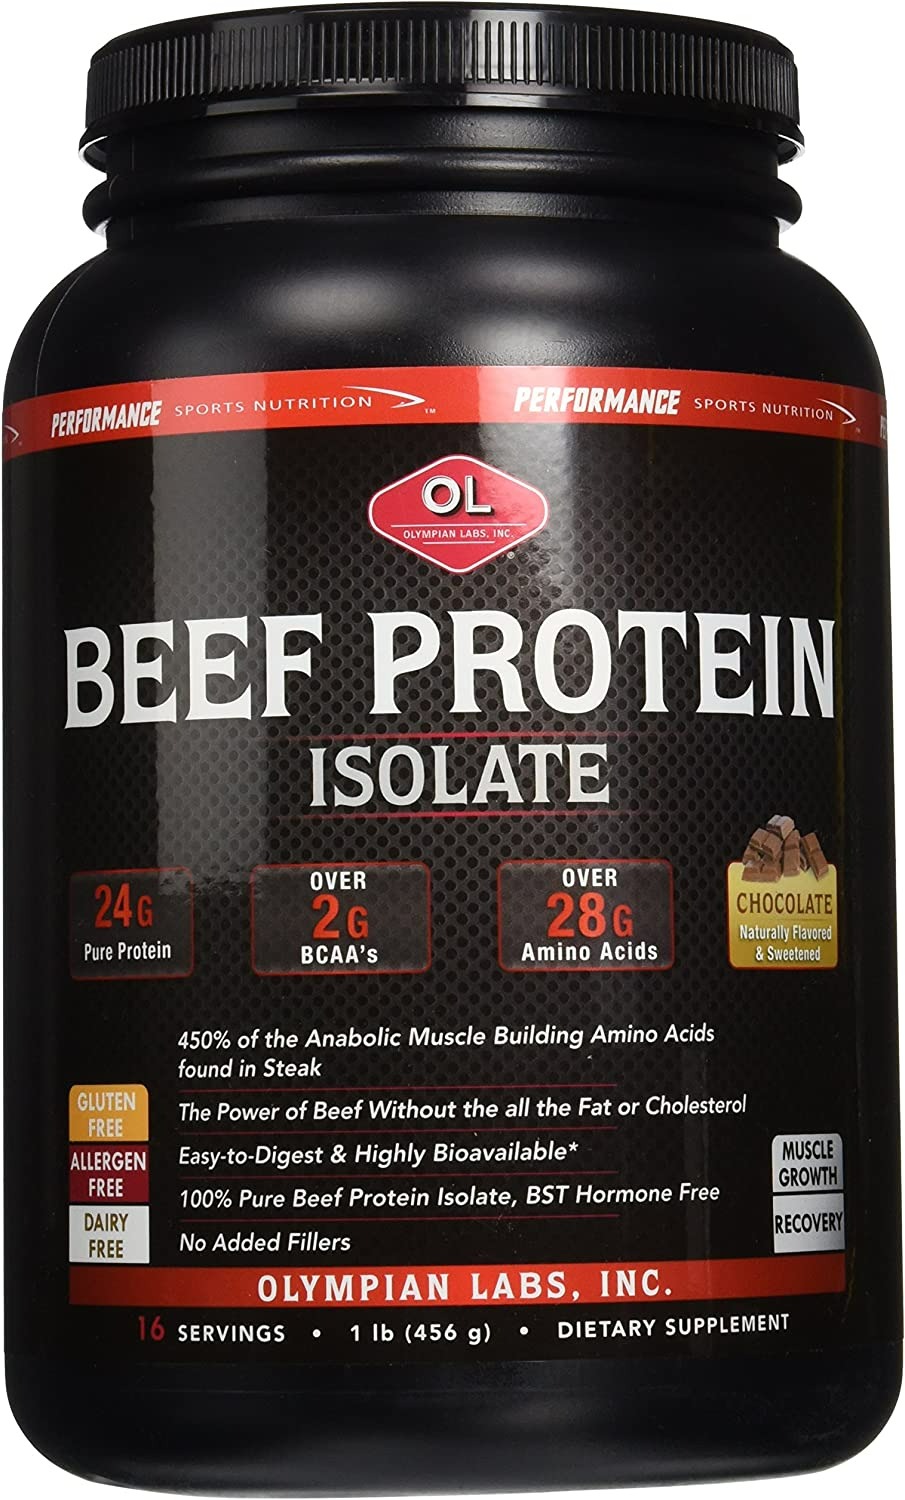 Olympian Labs Beef Protein Isolate - 16 Oz